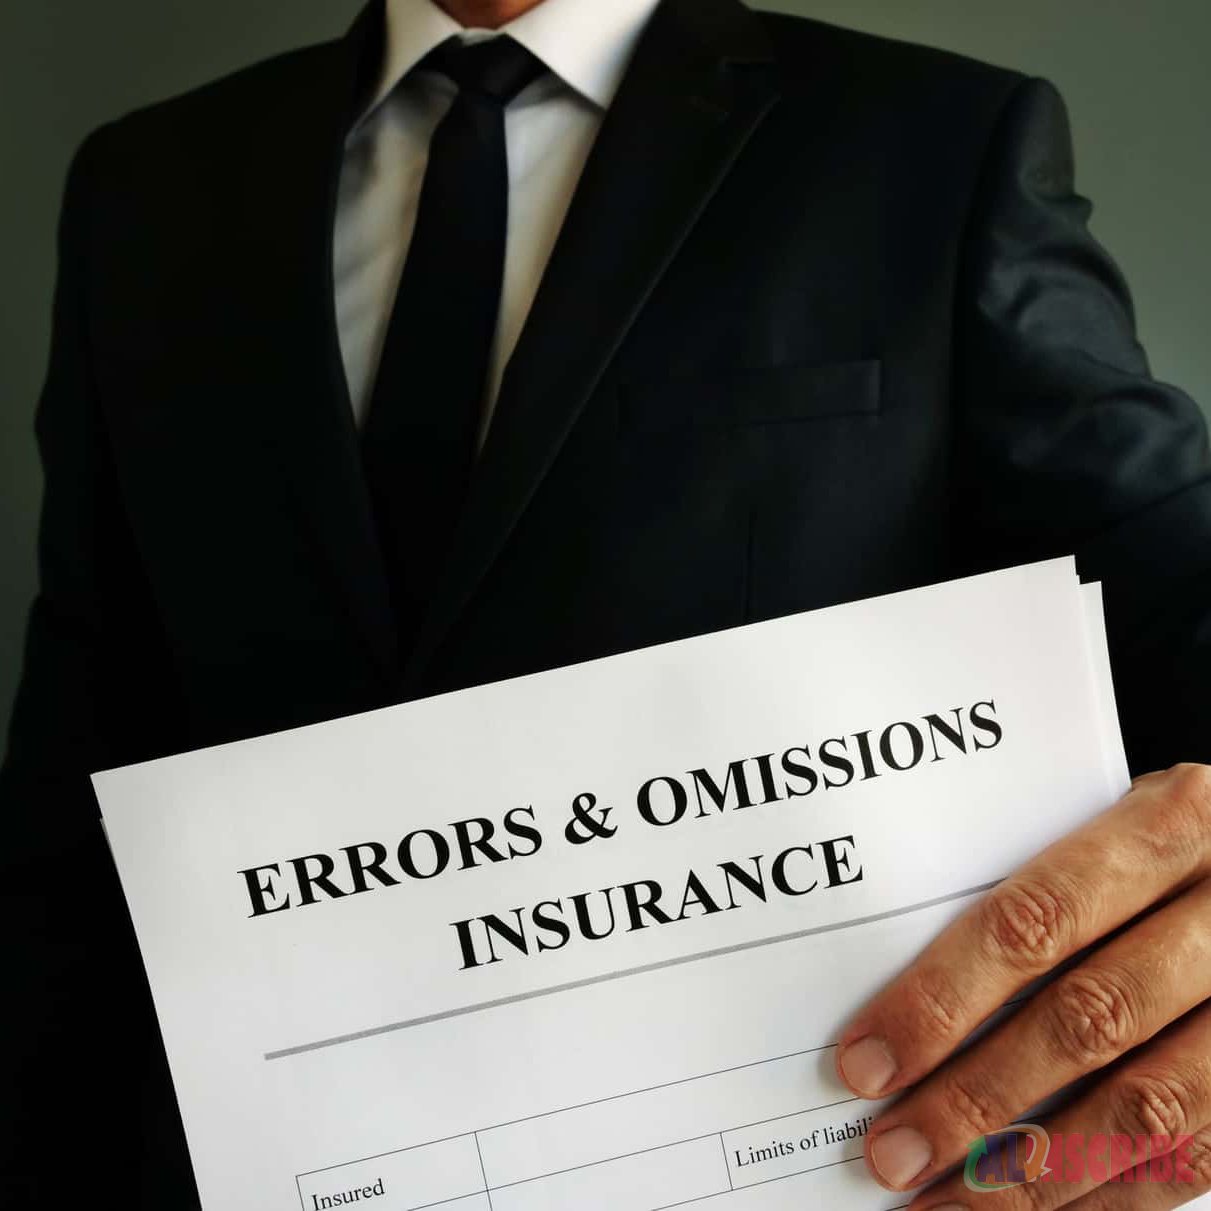 Error & Omission Insurance (E&O Insurance) : Definition, Coverages, Benefits And Companies